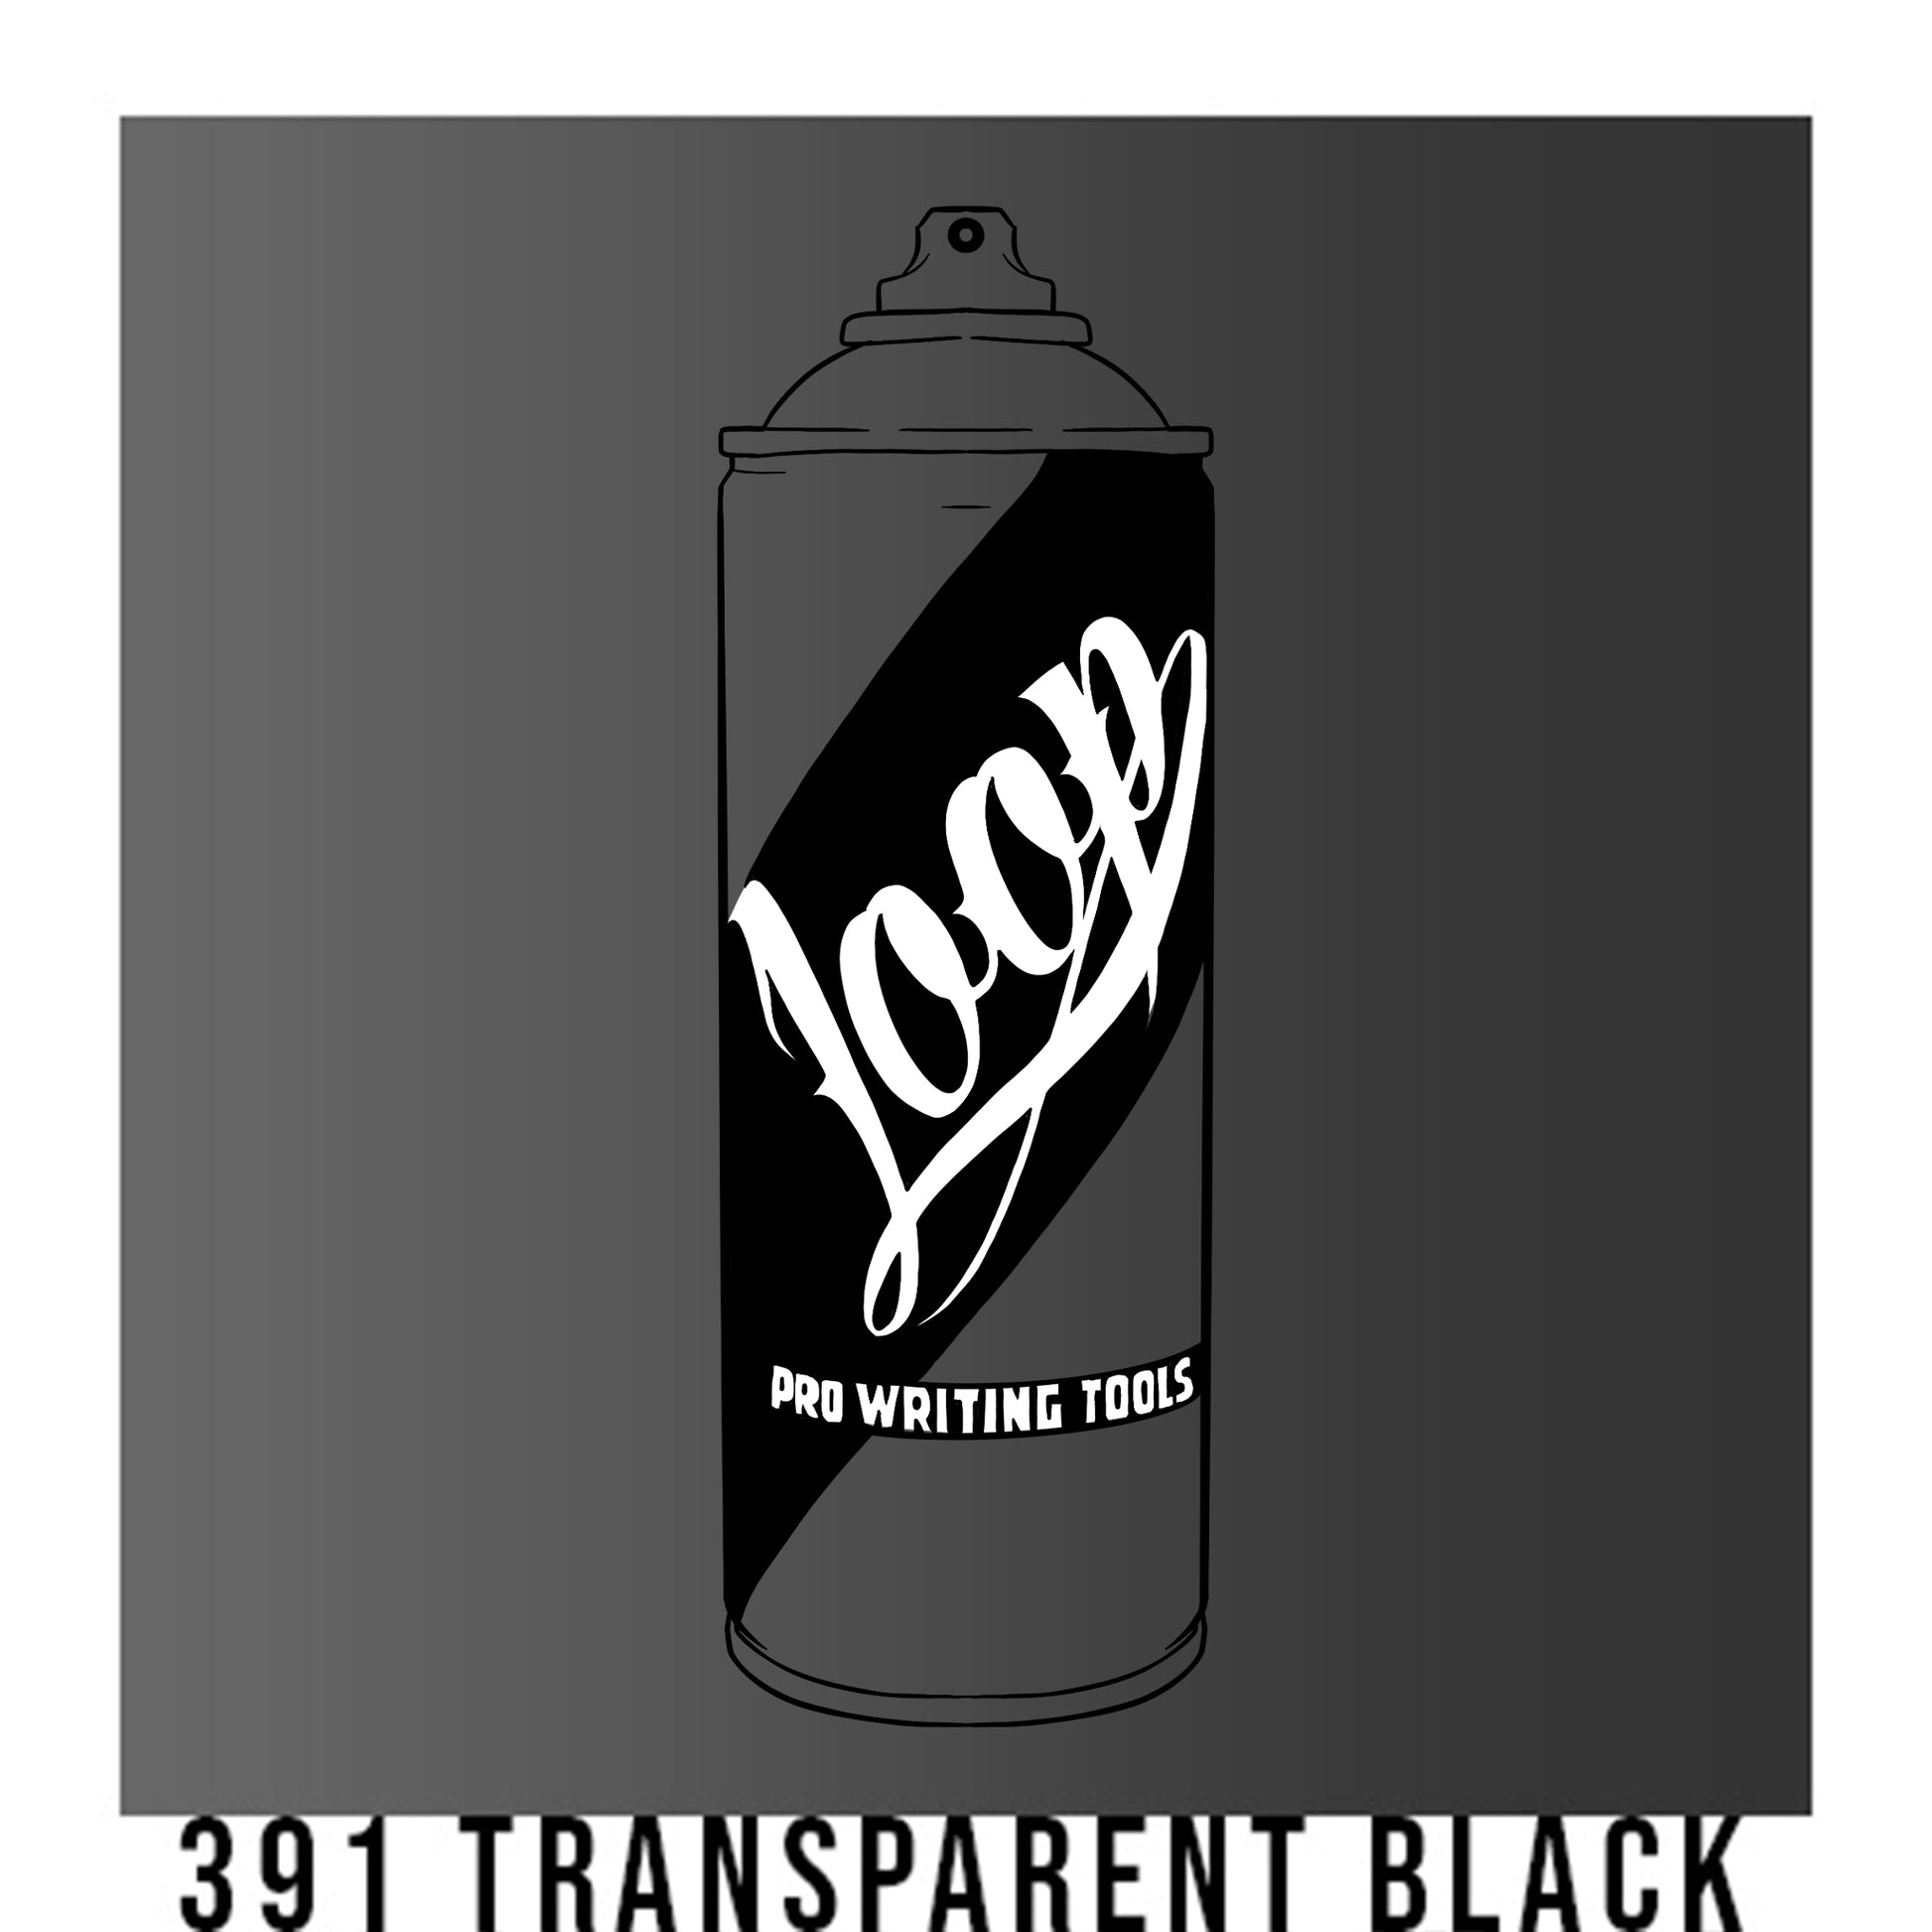 A black outline drawing of a grey to black gradient spray paint can with the word "Loop" written on the face in script. The background is a color swatch of the same grey to black gradient with a white border with the words "391 Transparent black" at the bottom.